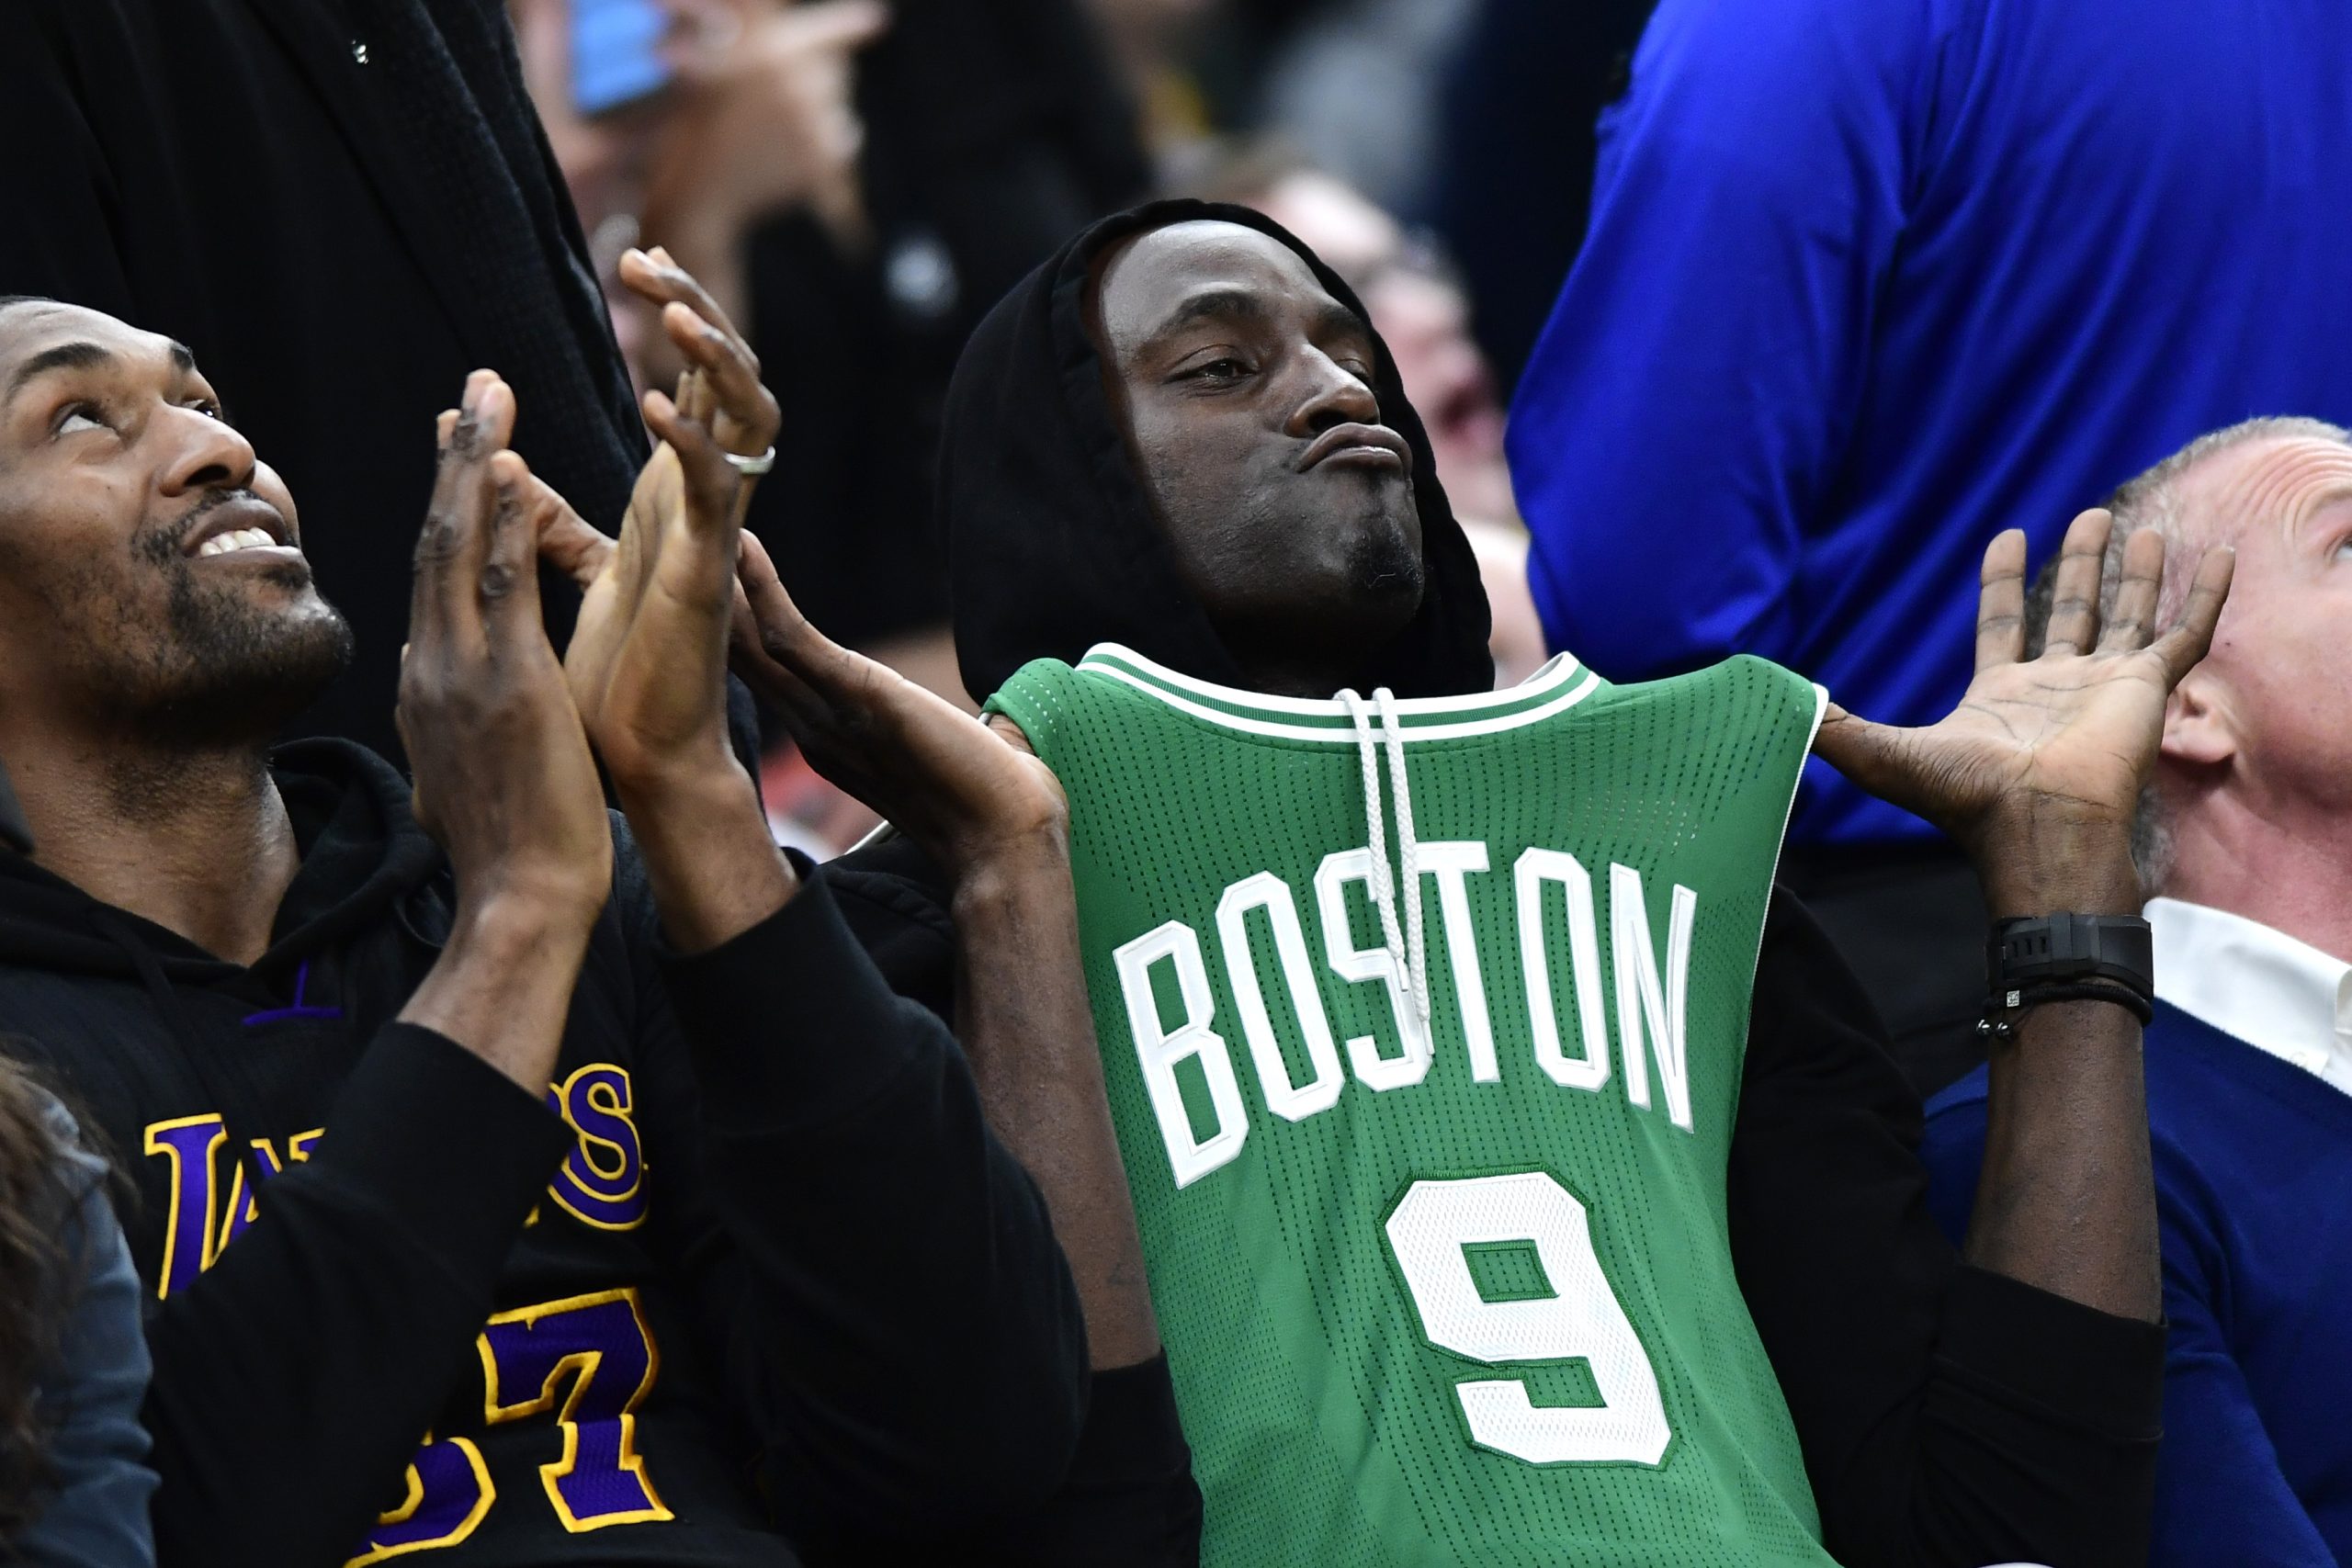 GARNETT'S JERSEY RETIREMENT ALSO MEANT PEACE FOR THE UNFORGETTABLE